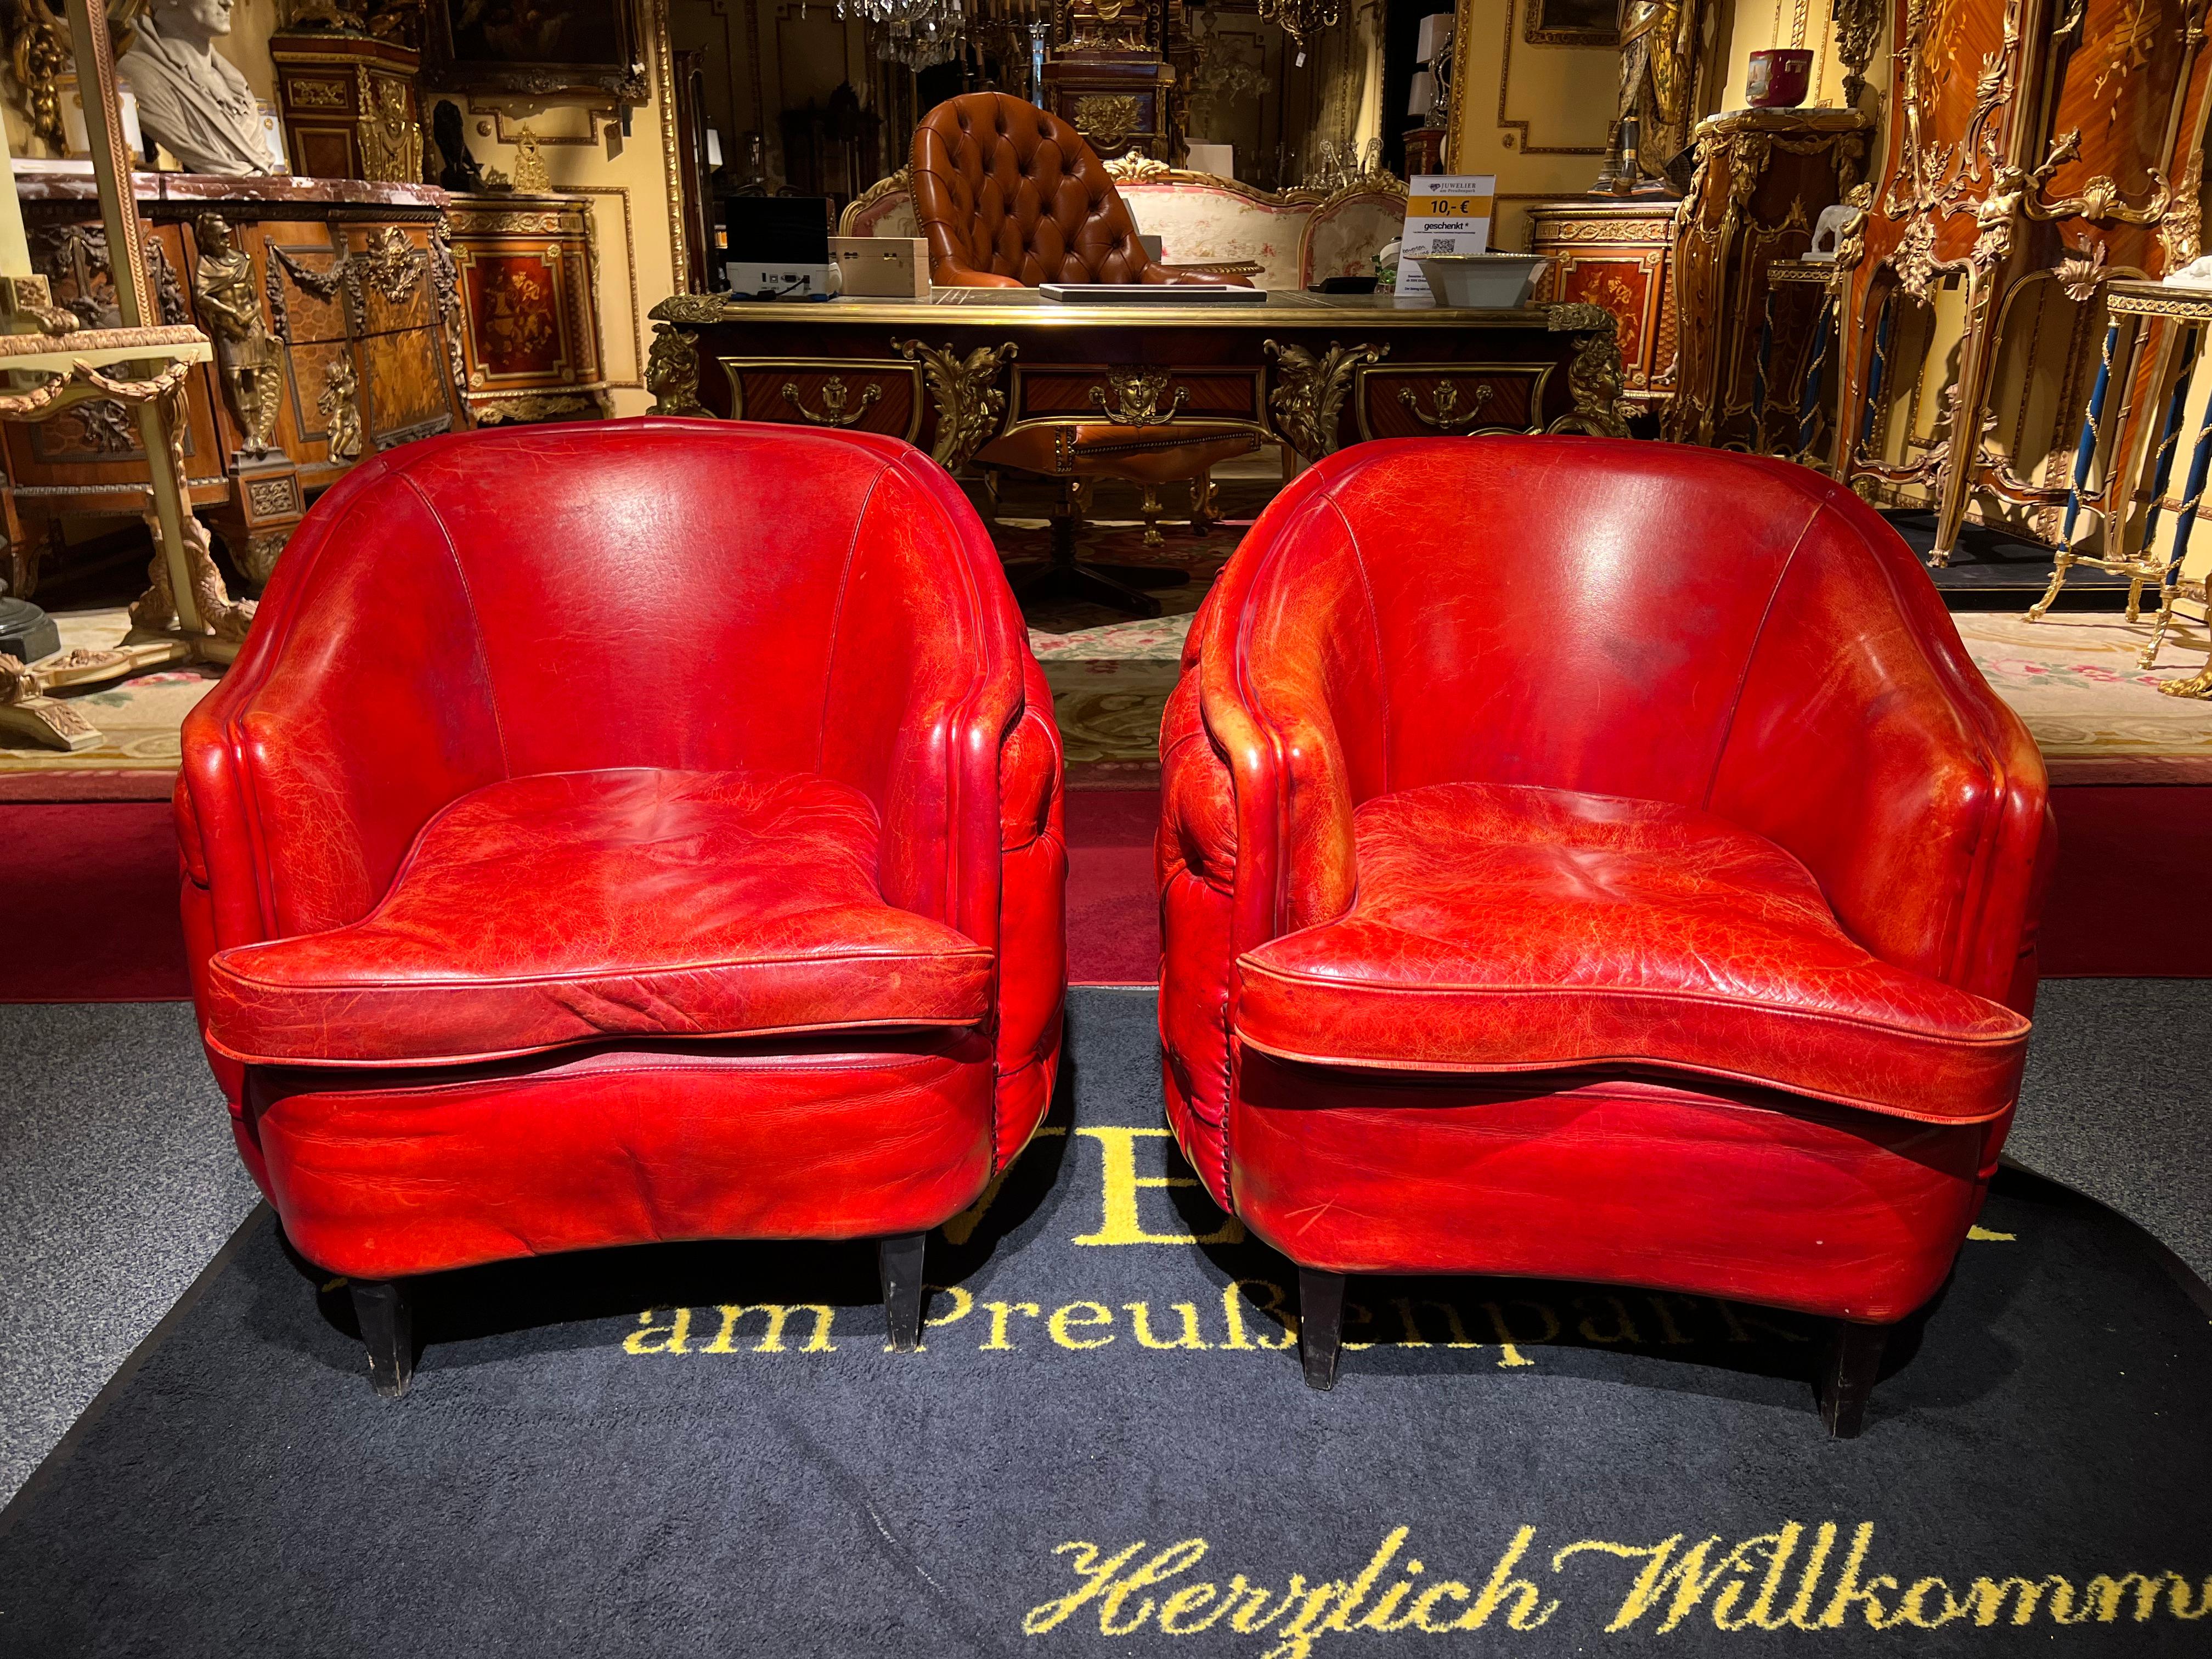 Rare Pair of Antique Vintage Chesterfield Armchairs in Oxblood red leather 1